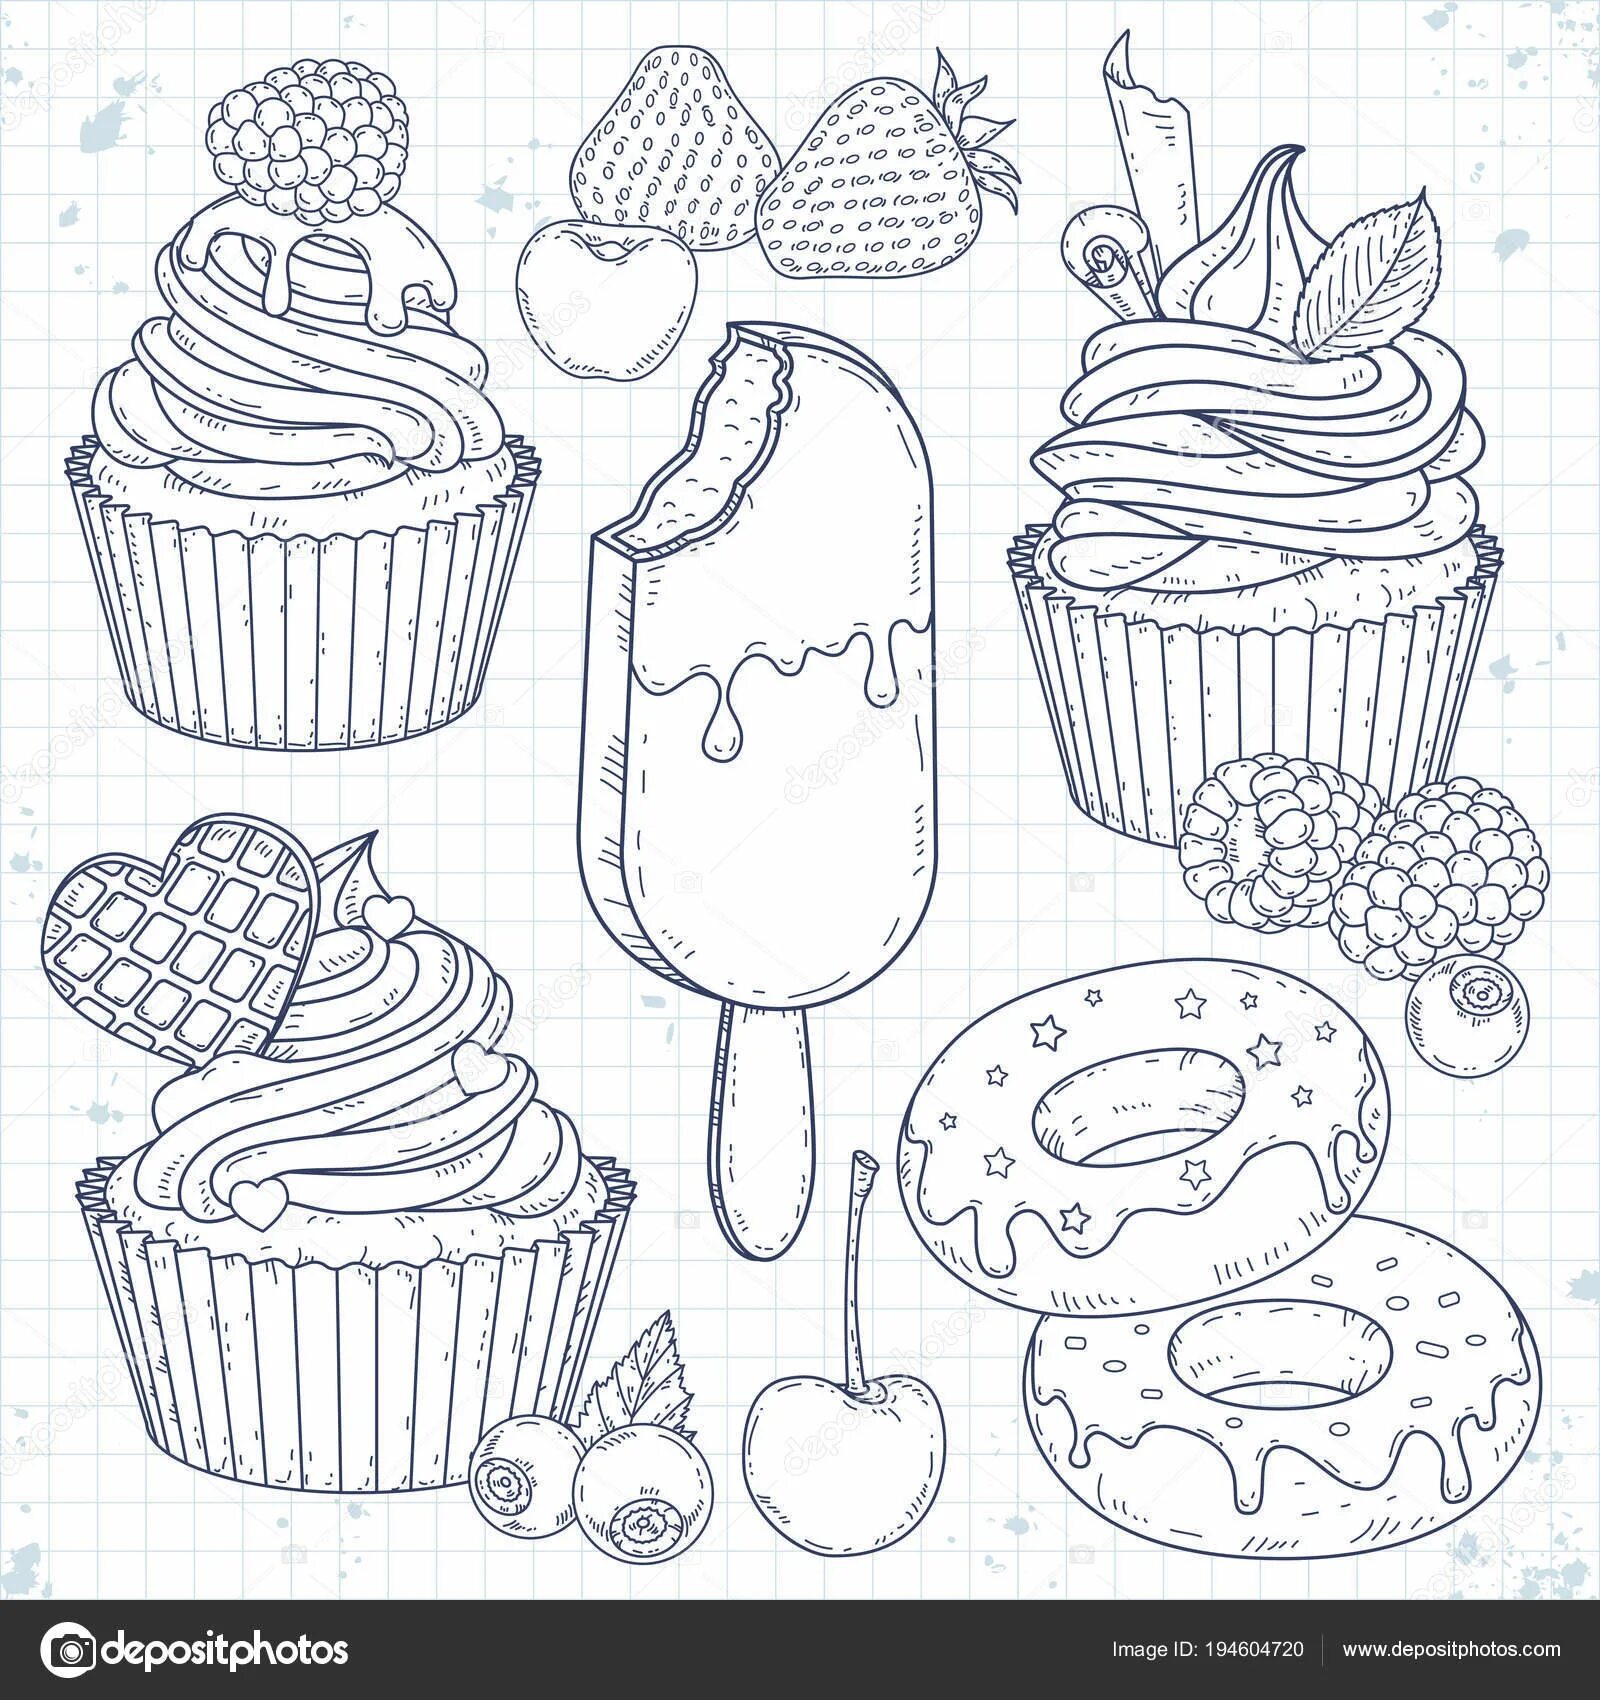 Cupcakes and pies #3